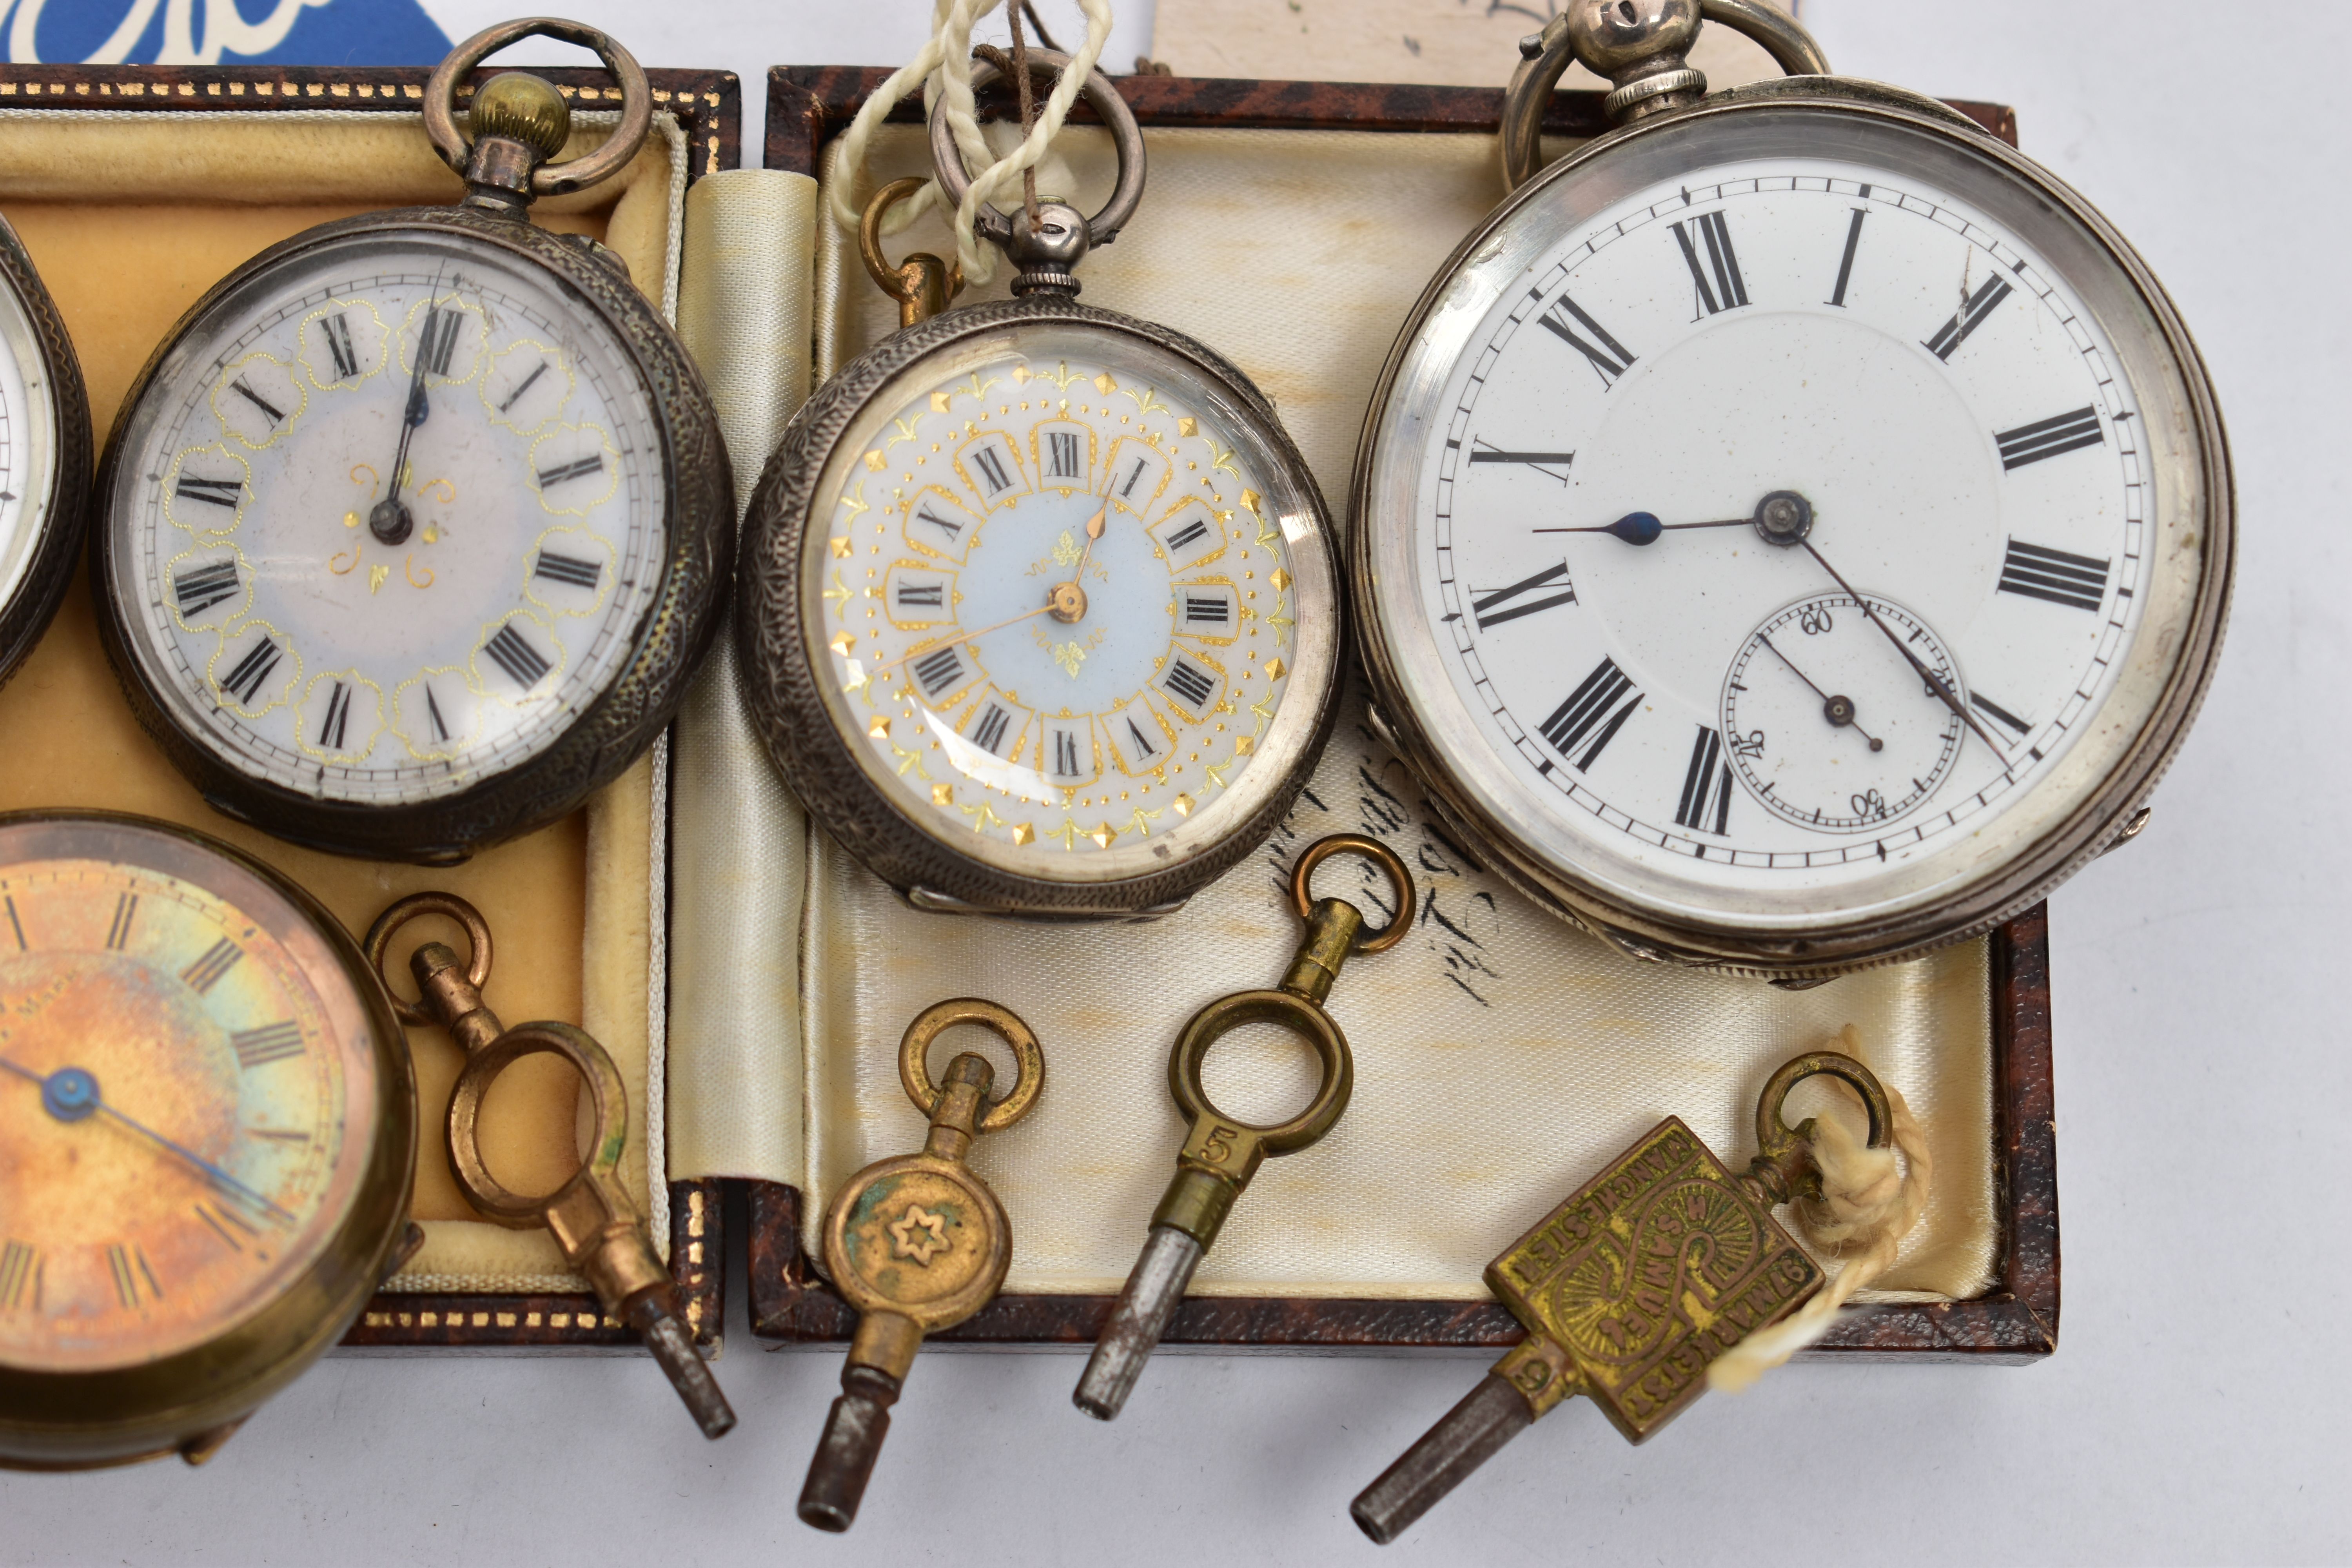 FIVE OPEN FACE POCKET WATCHES, the first a silver cased ladies pocket watch, hand wound movement, - Image 2 of 5